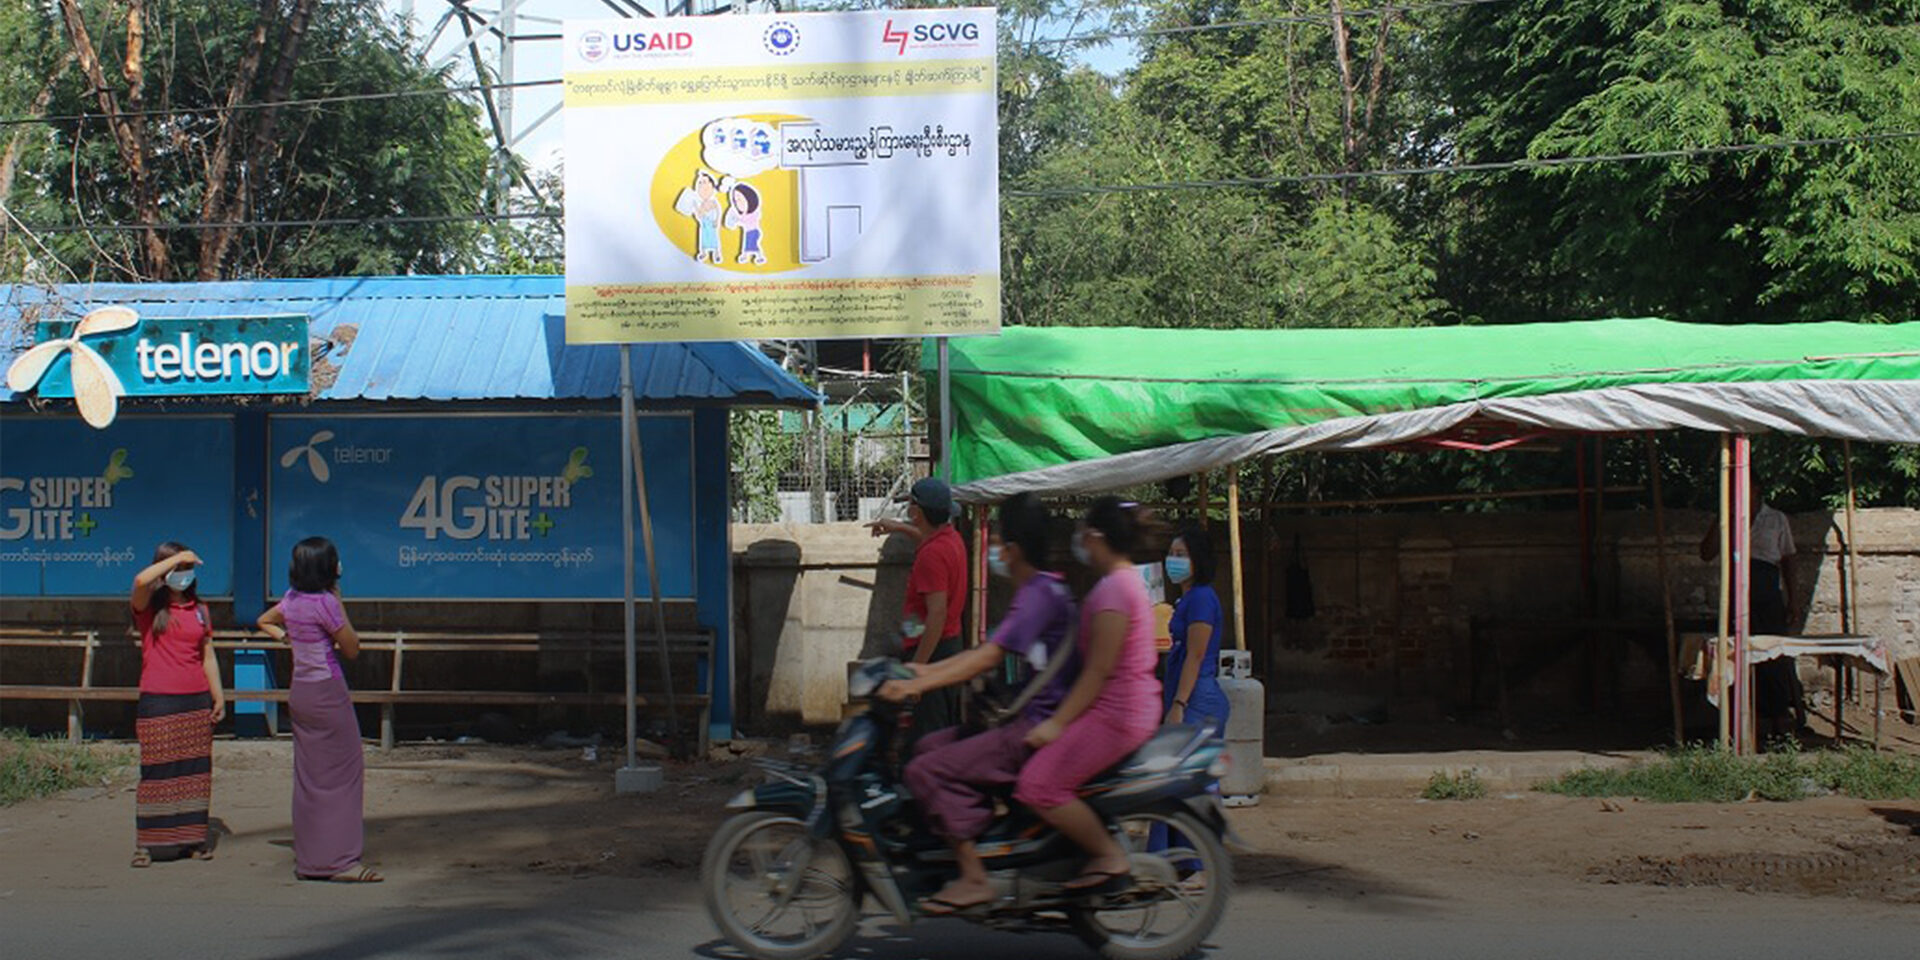 In the Magwe region in September 2020, passengers on a motorbike pass a USAID PRLM billboard about preventing and reporting human trafficking. The Magwe region has a large population of migrant workers, who can have higher risks of becoming victims of trafficking.